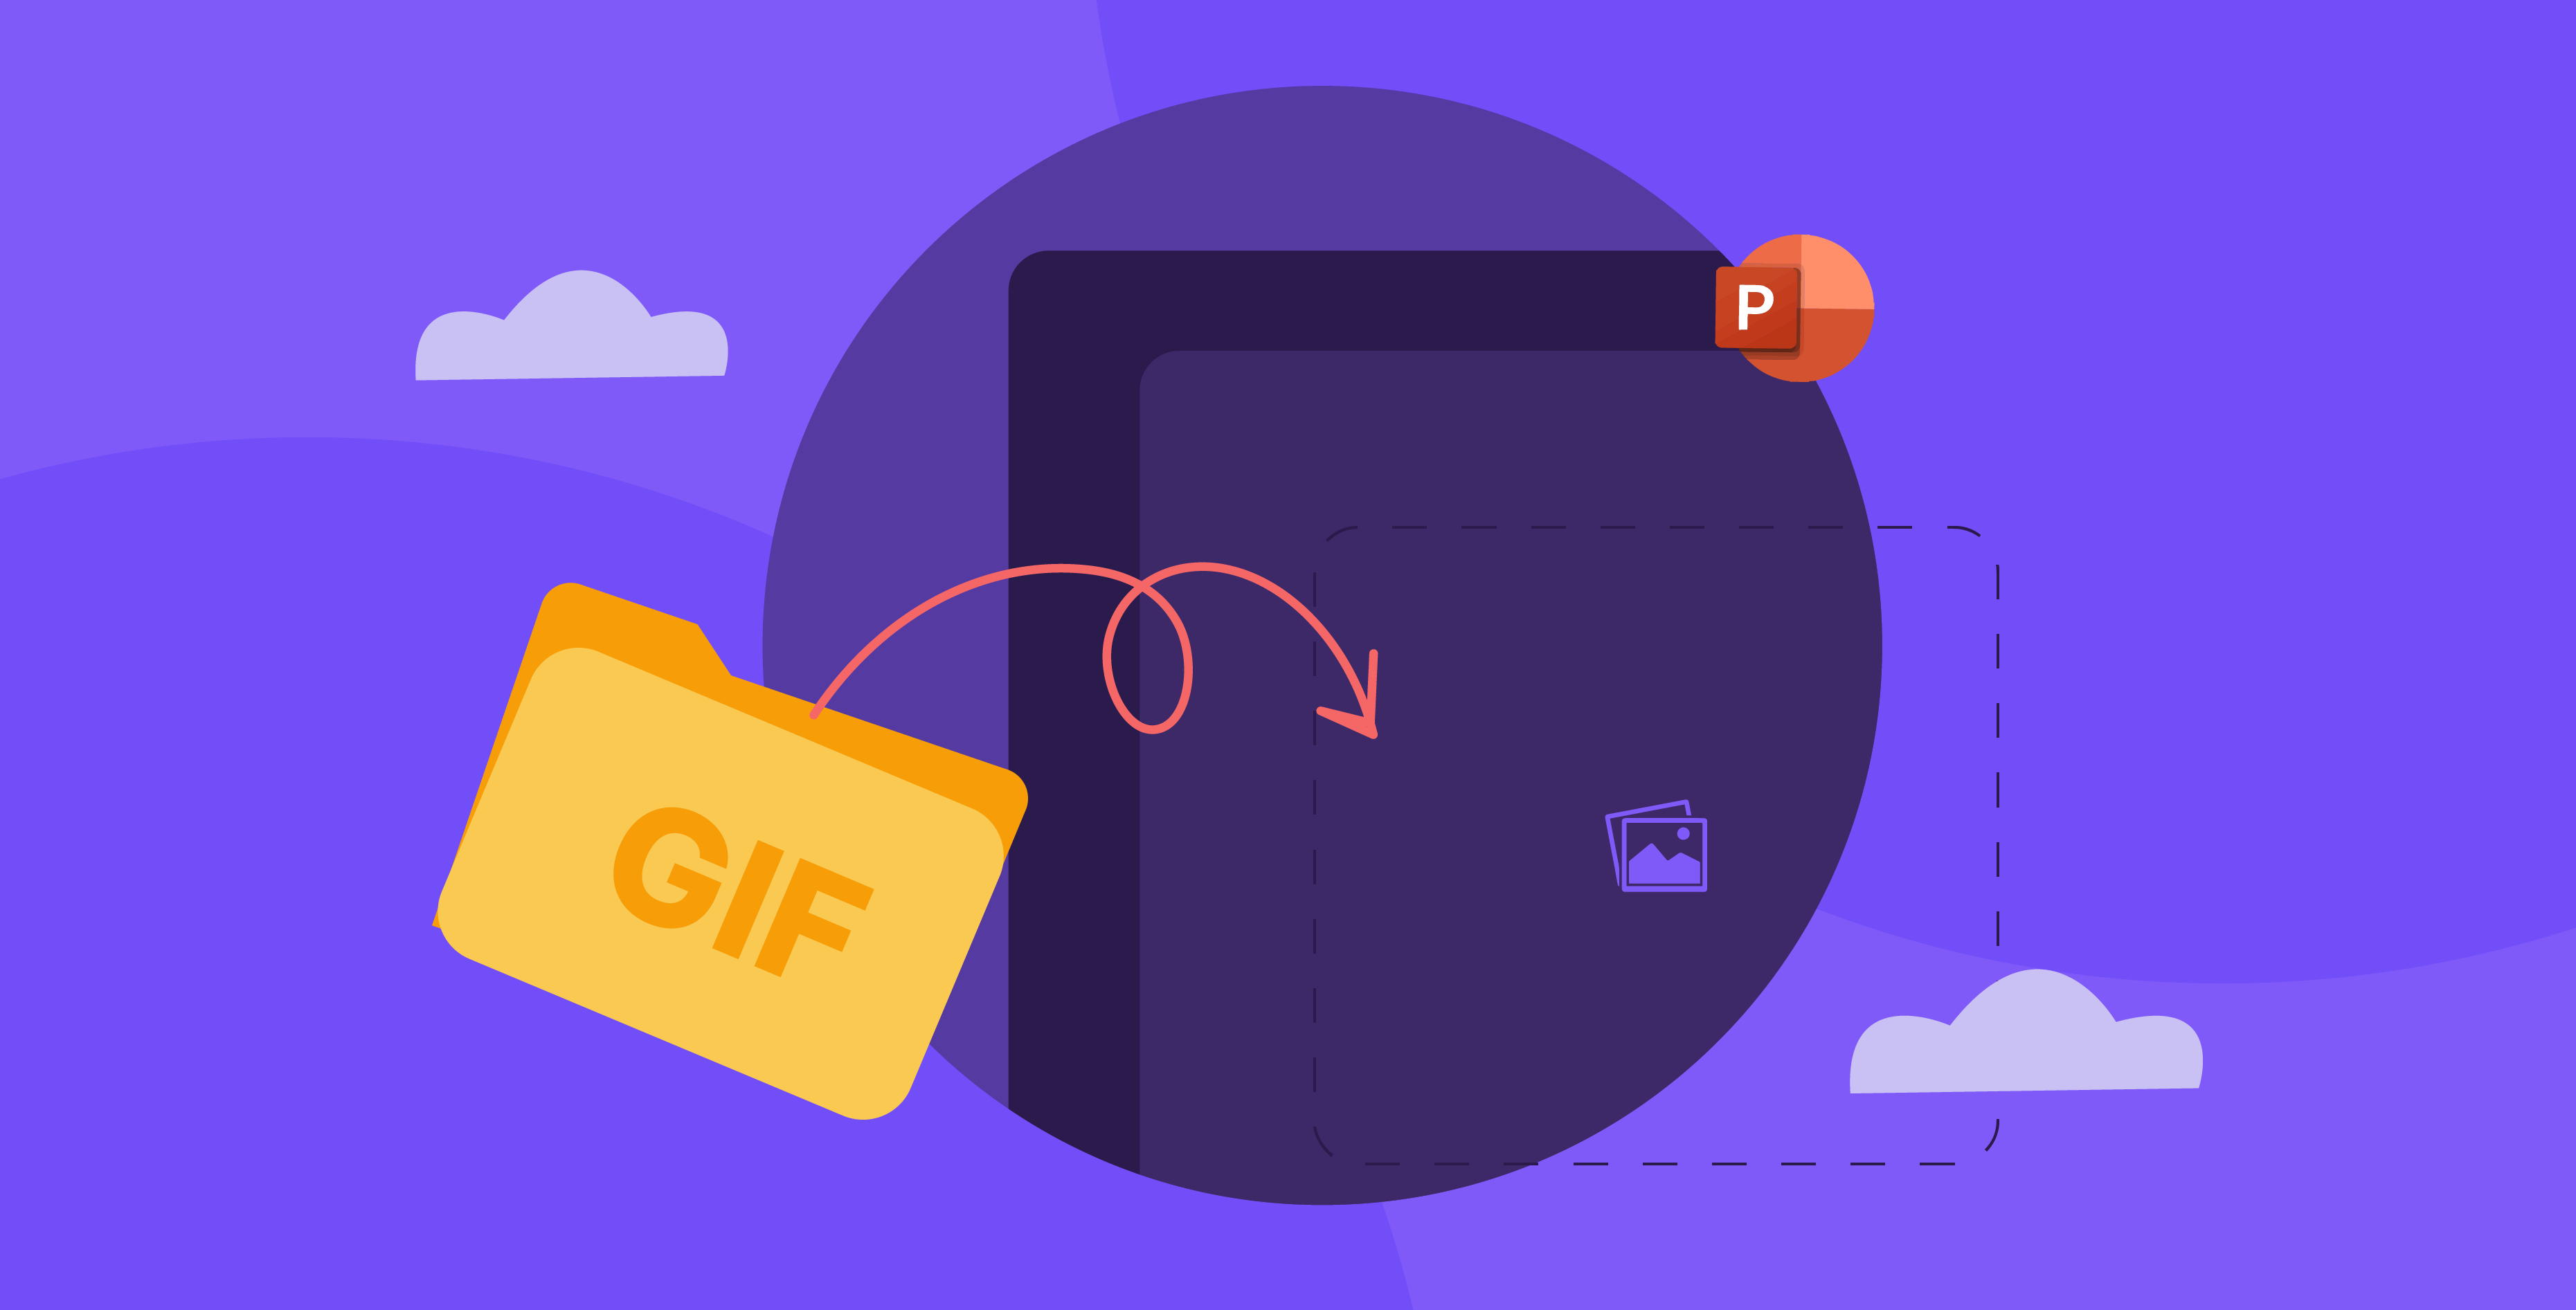 How to add an animated GIF to a presentation